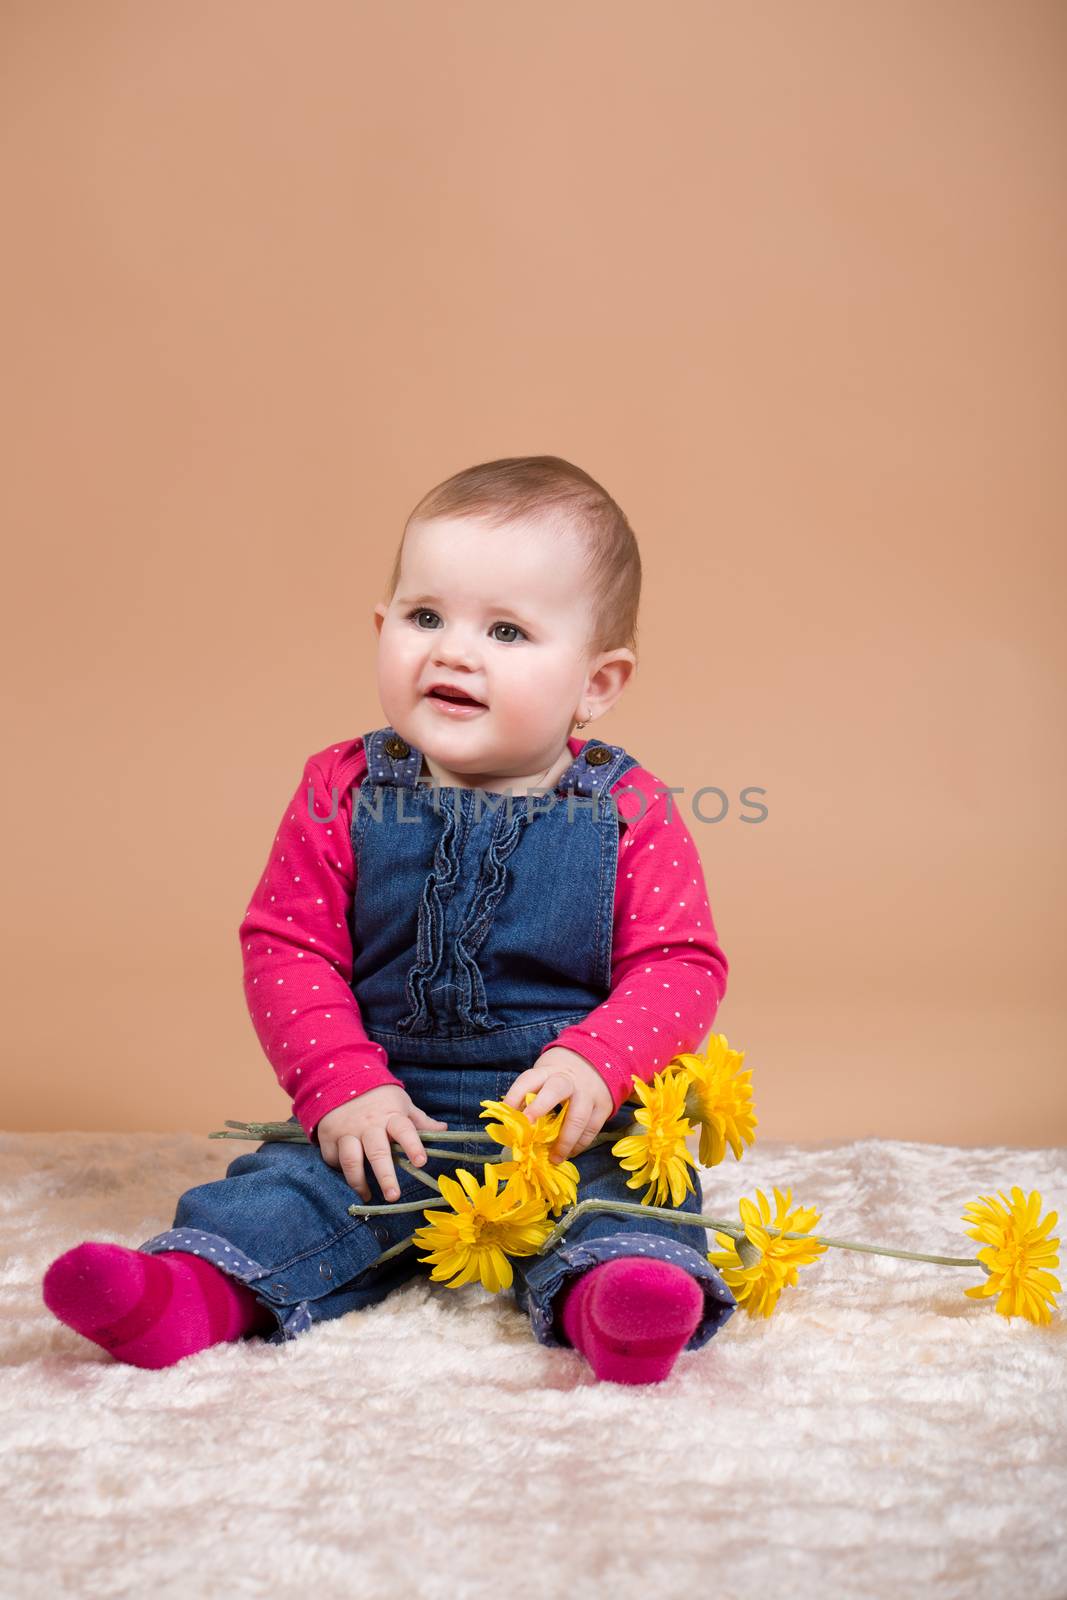 smiling infant baby with yellow flowers - the first year of the new life